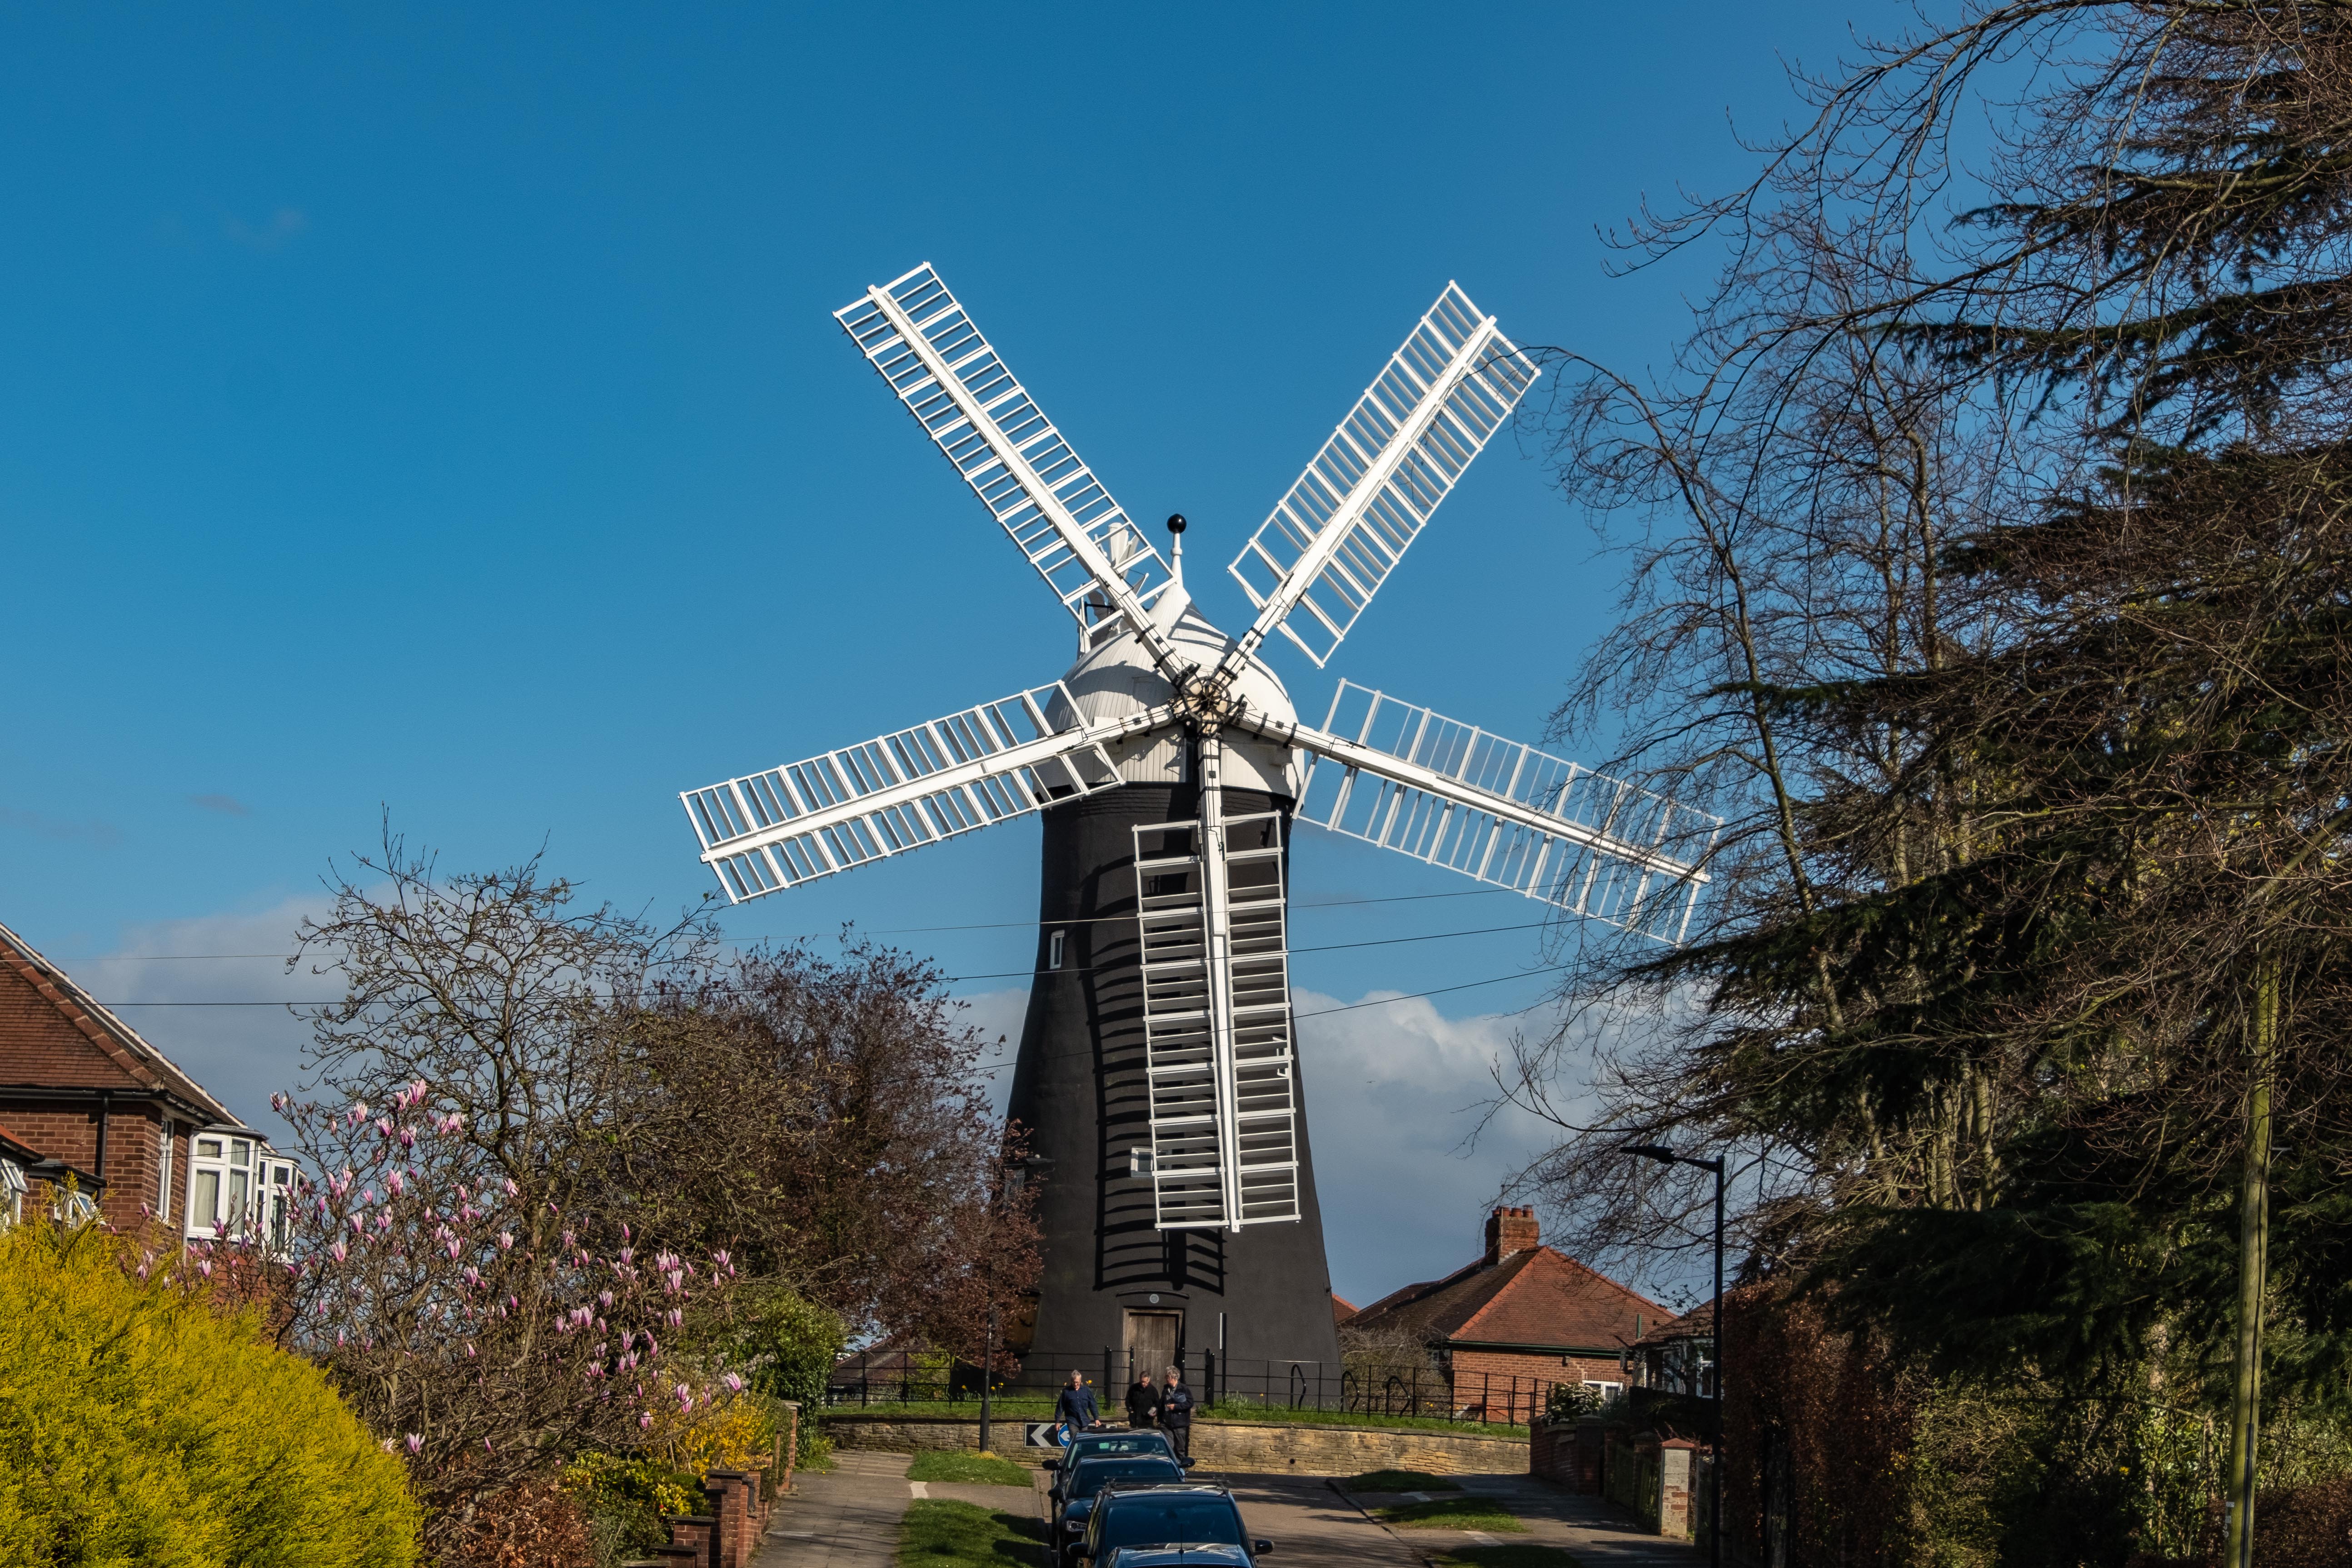 Image of Holgate Windmill, York, a tower mill which has five sails, a cap and fantail.